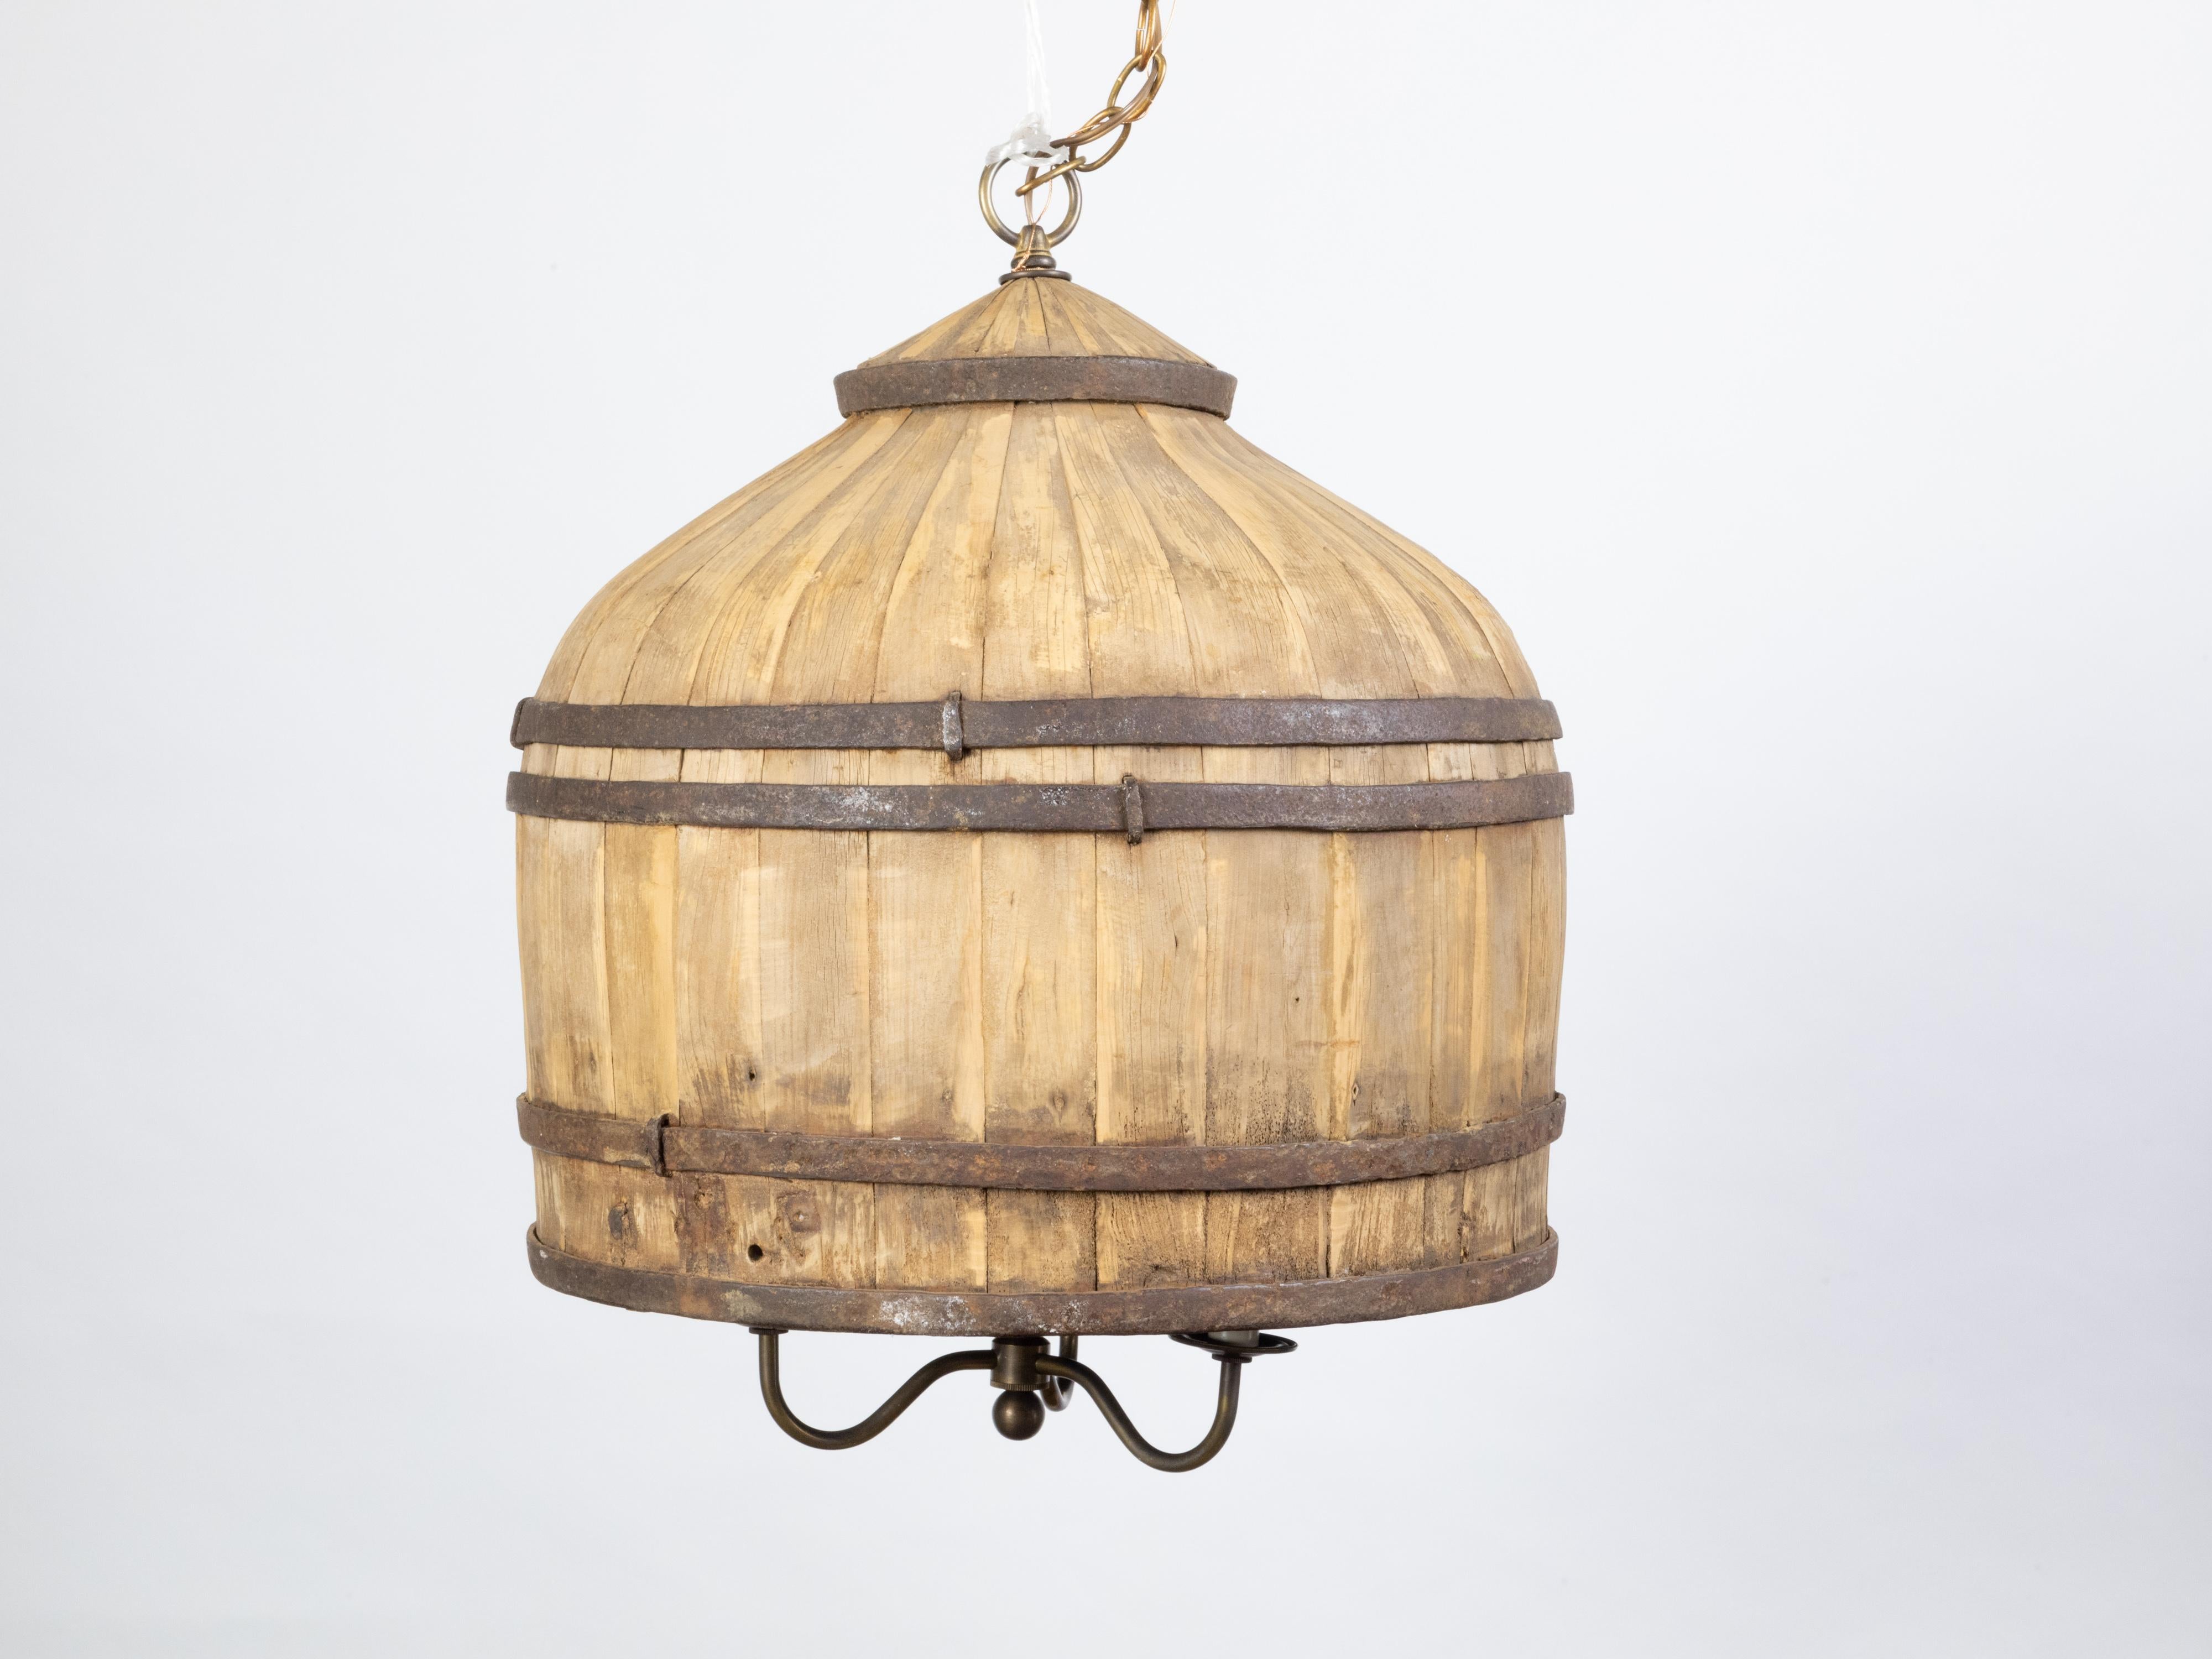 Rustic English Vintage Wooden Barrel Light Fixture with Three Scrolling Arms In Good Condition For Sale In Atlanta, GA